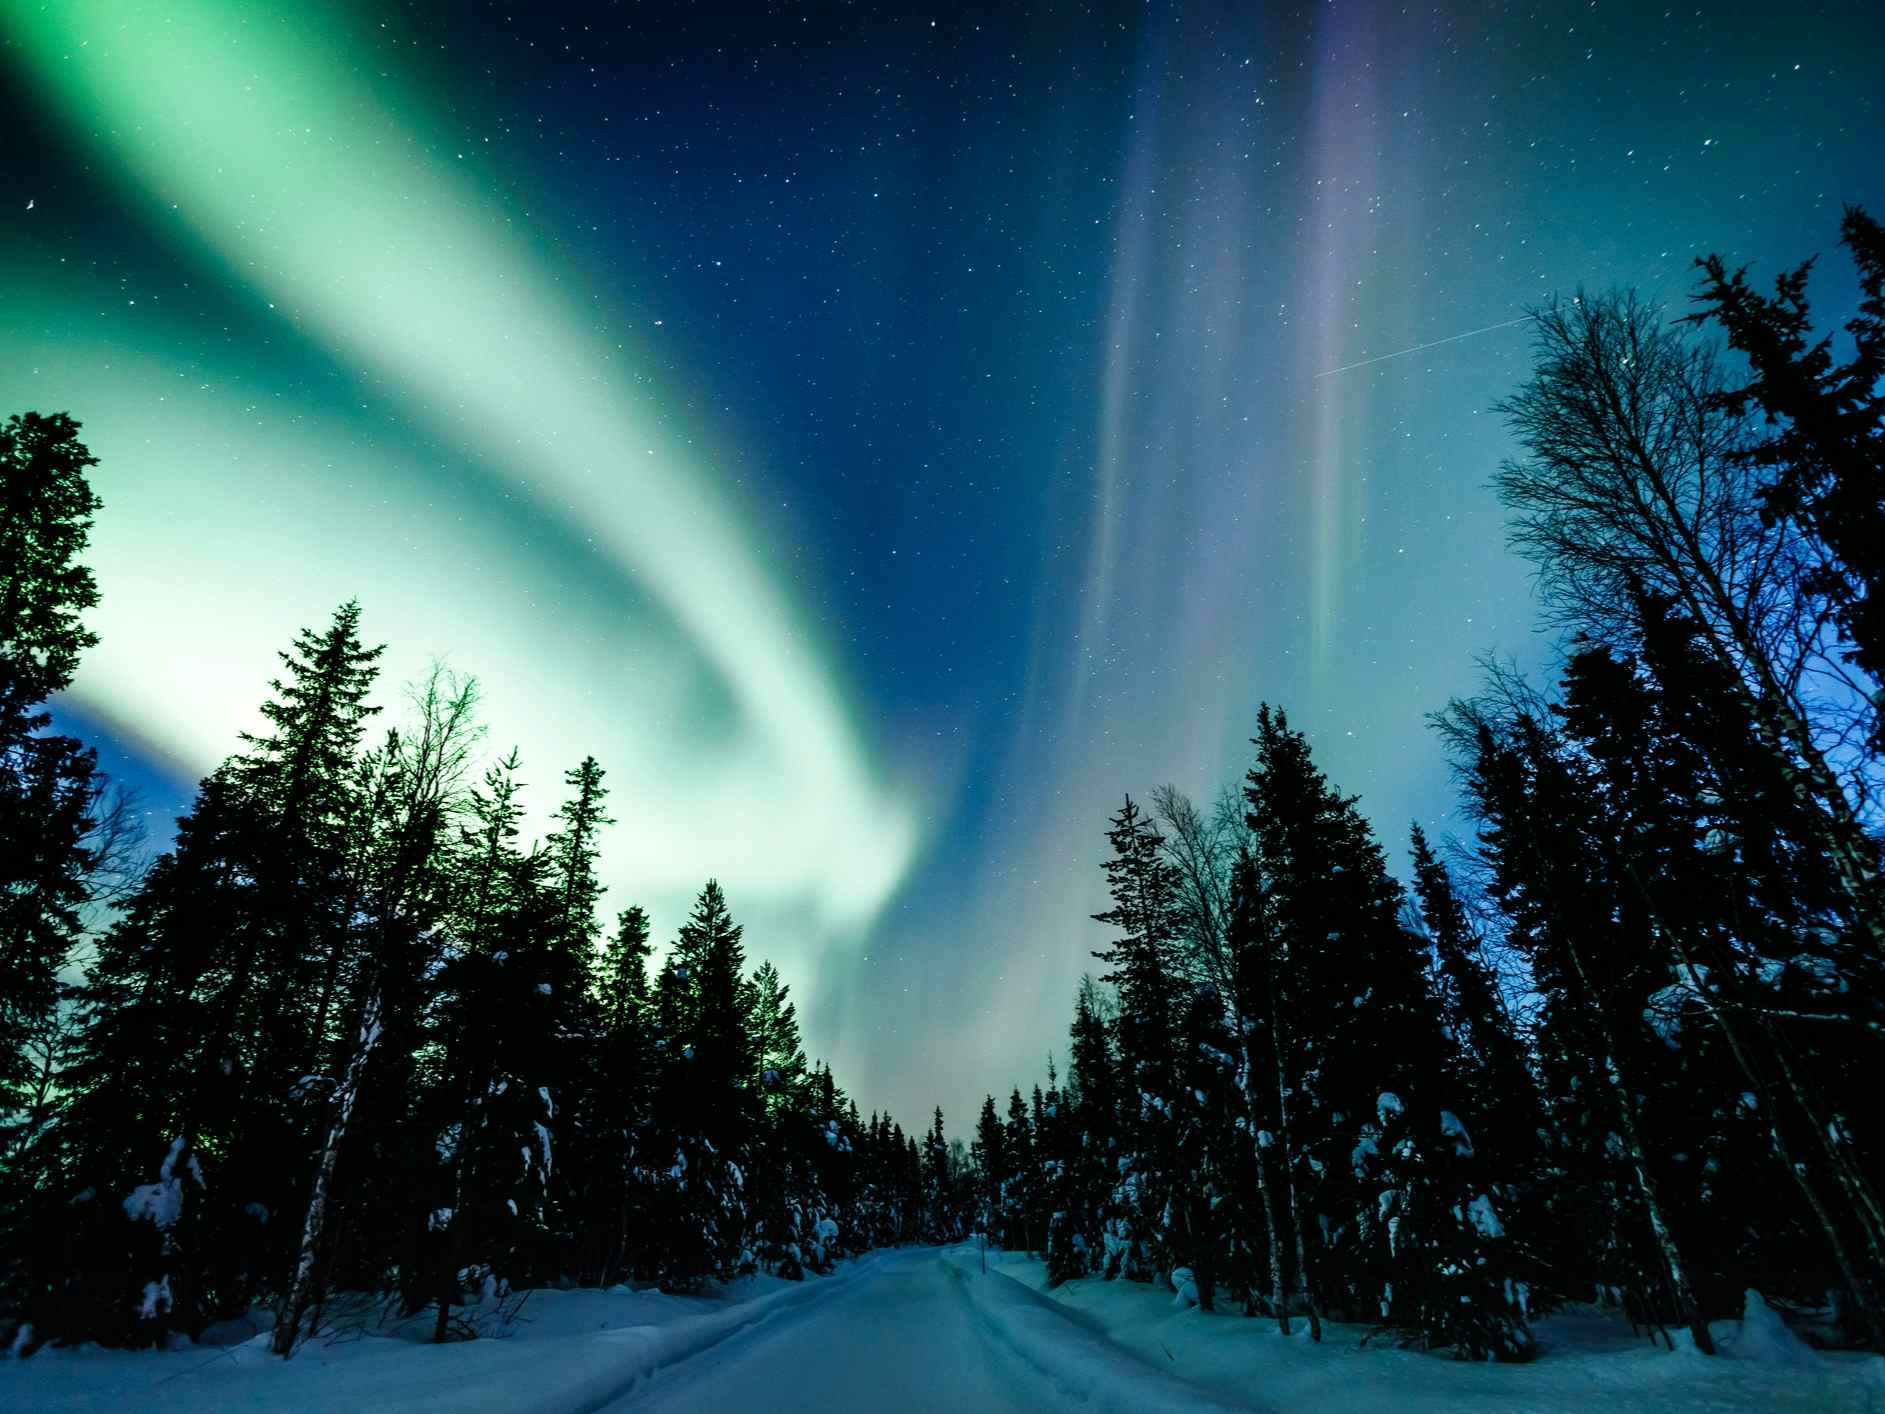 Northern lights (Aurora Borealis) over the road in winter in Finland, Lapland